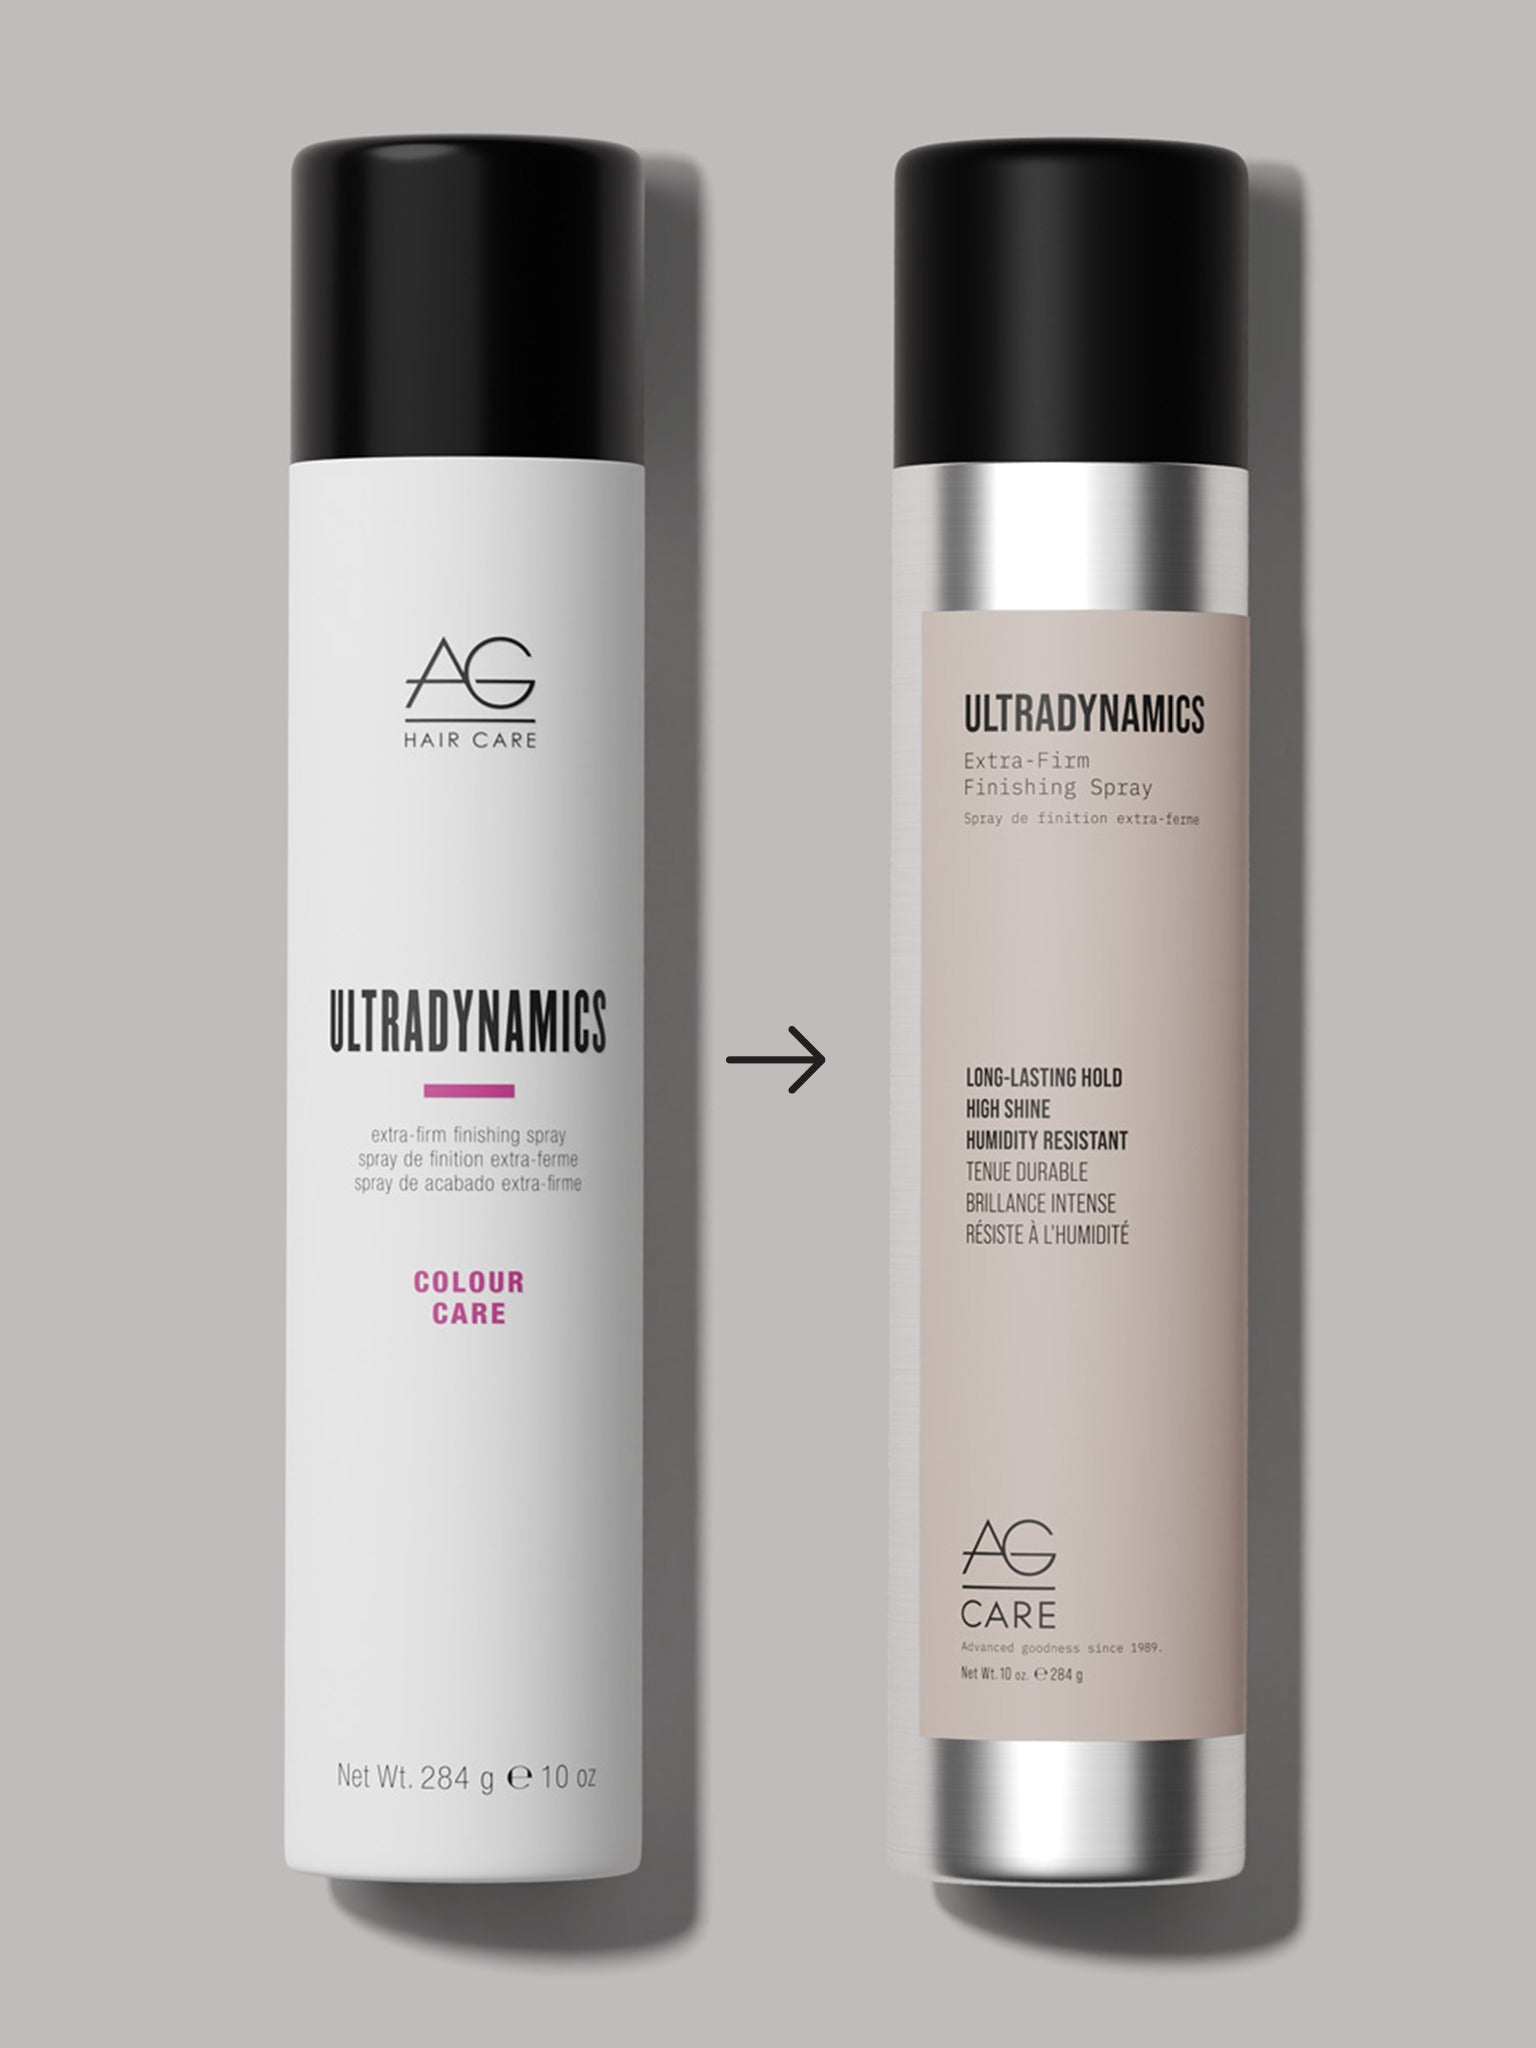 ULTRADYNAMICS Extra-Firm Finishing Spray - ProCare Outlet by AG Hair